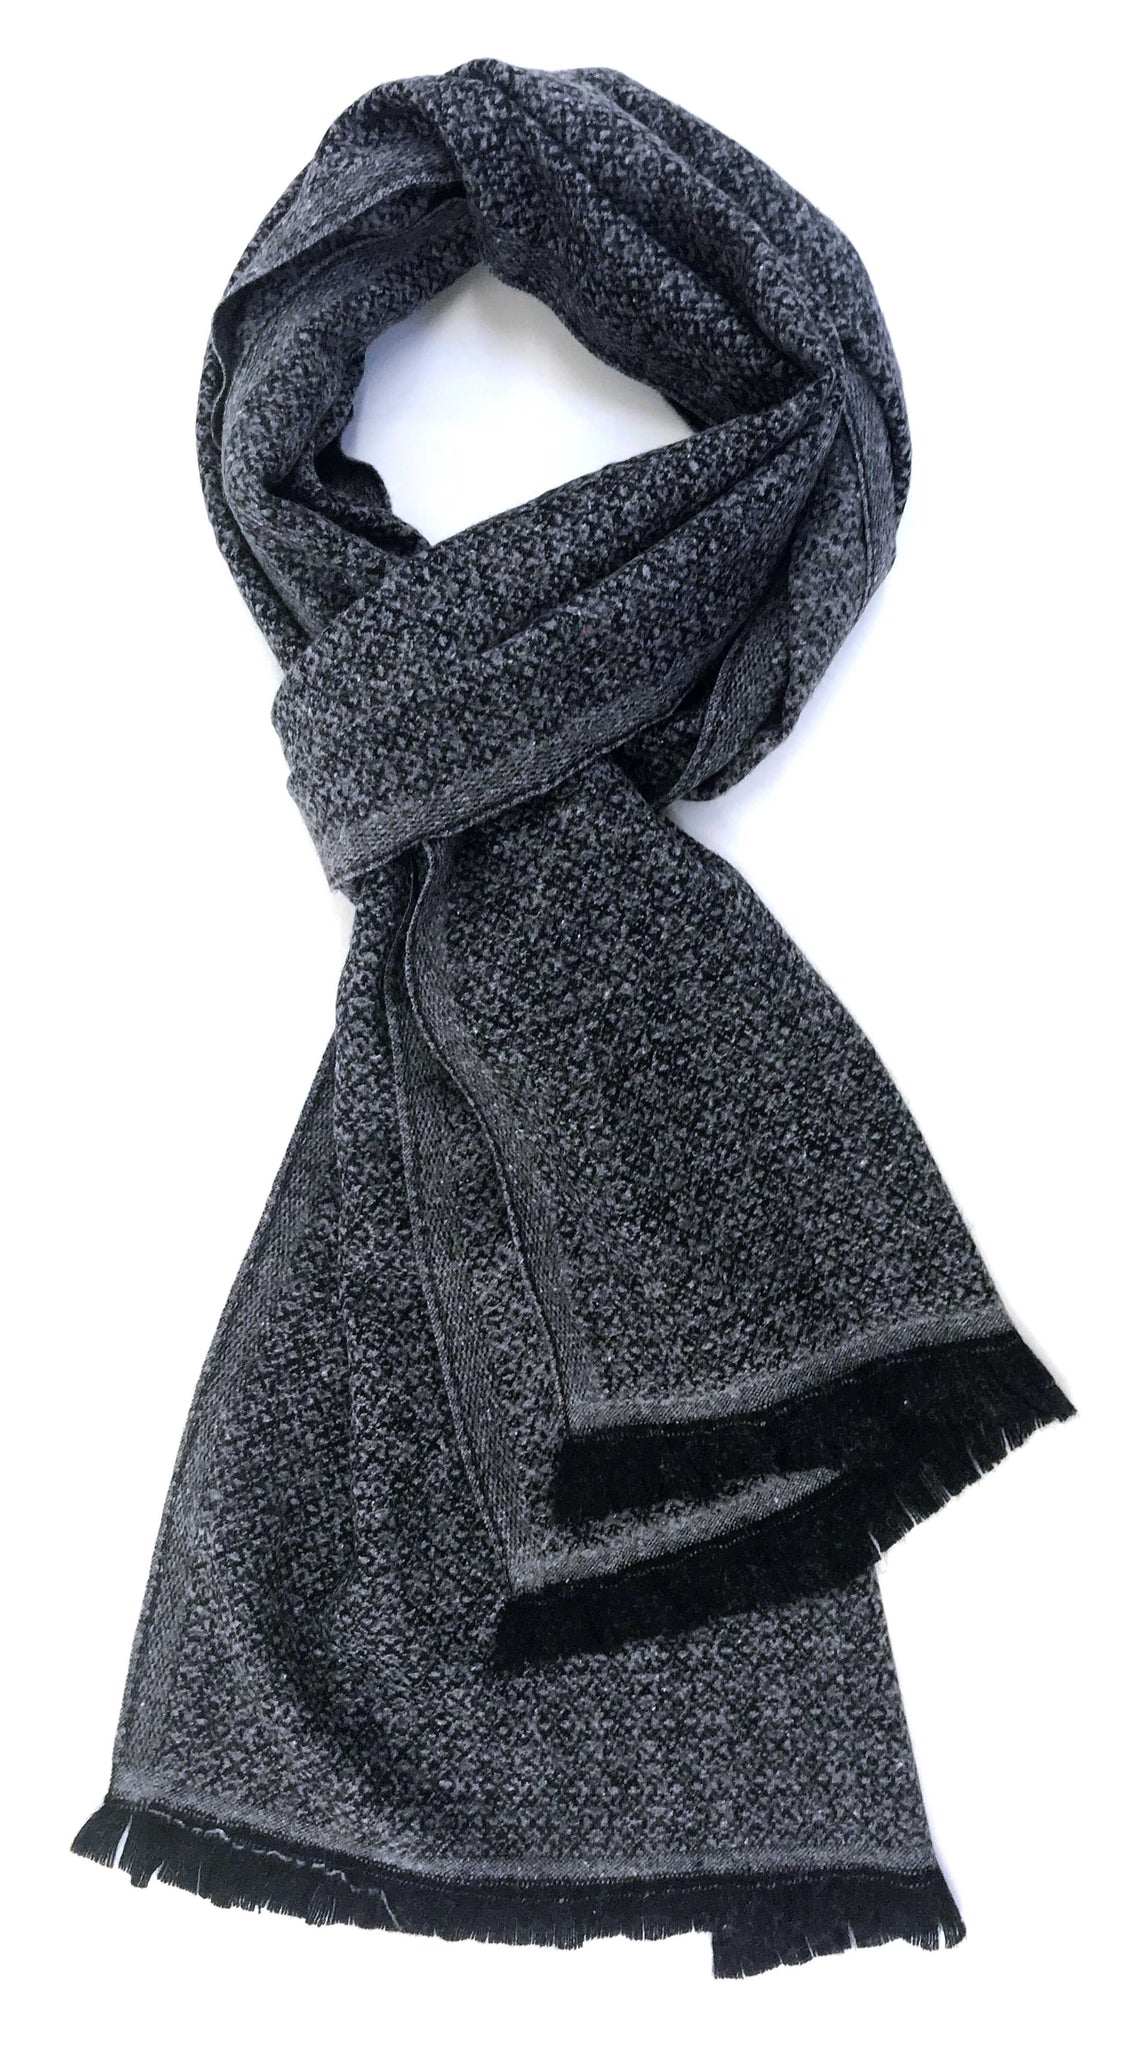 Soft cashmere blend scarf with fine black and grey allover pattern - Marie-Pierre Rousseau